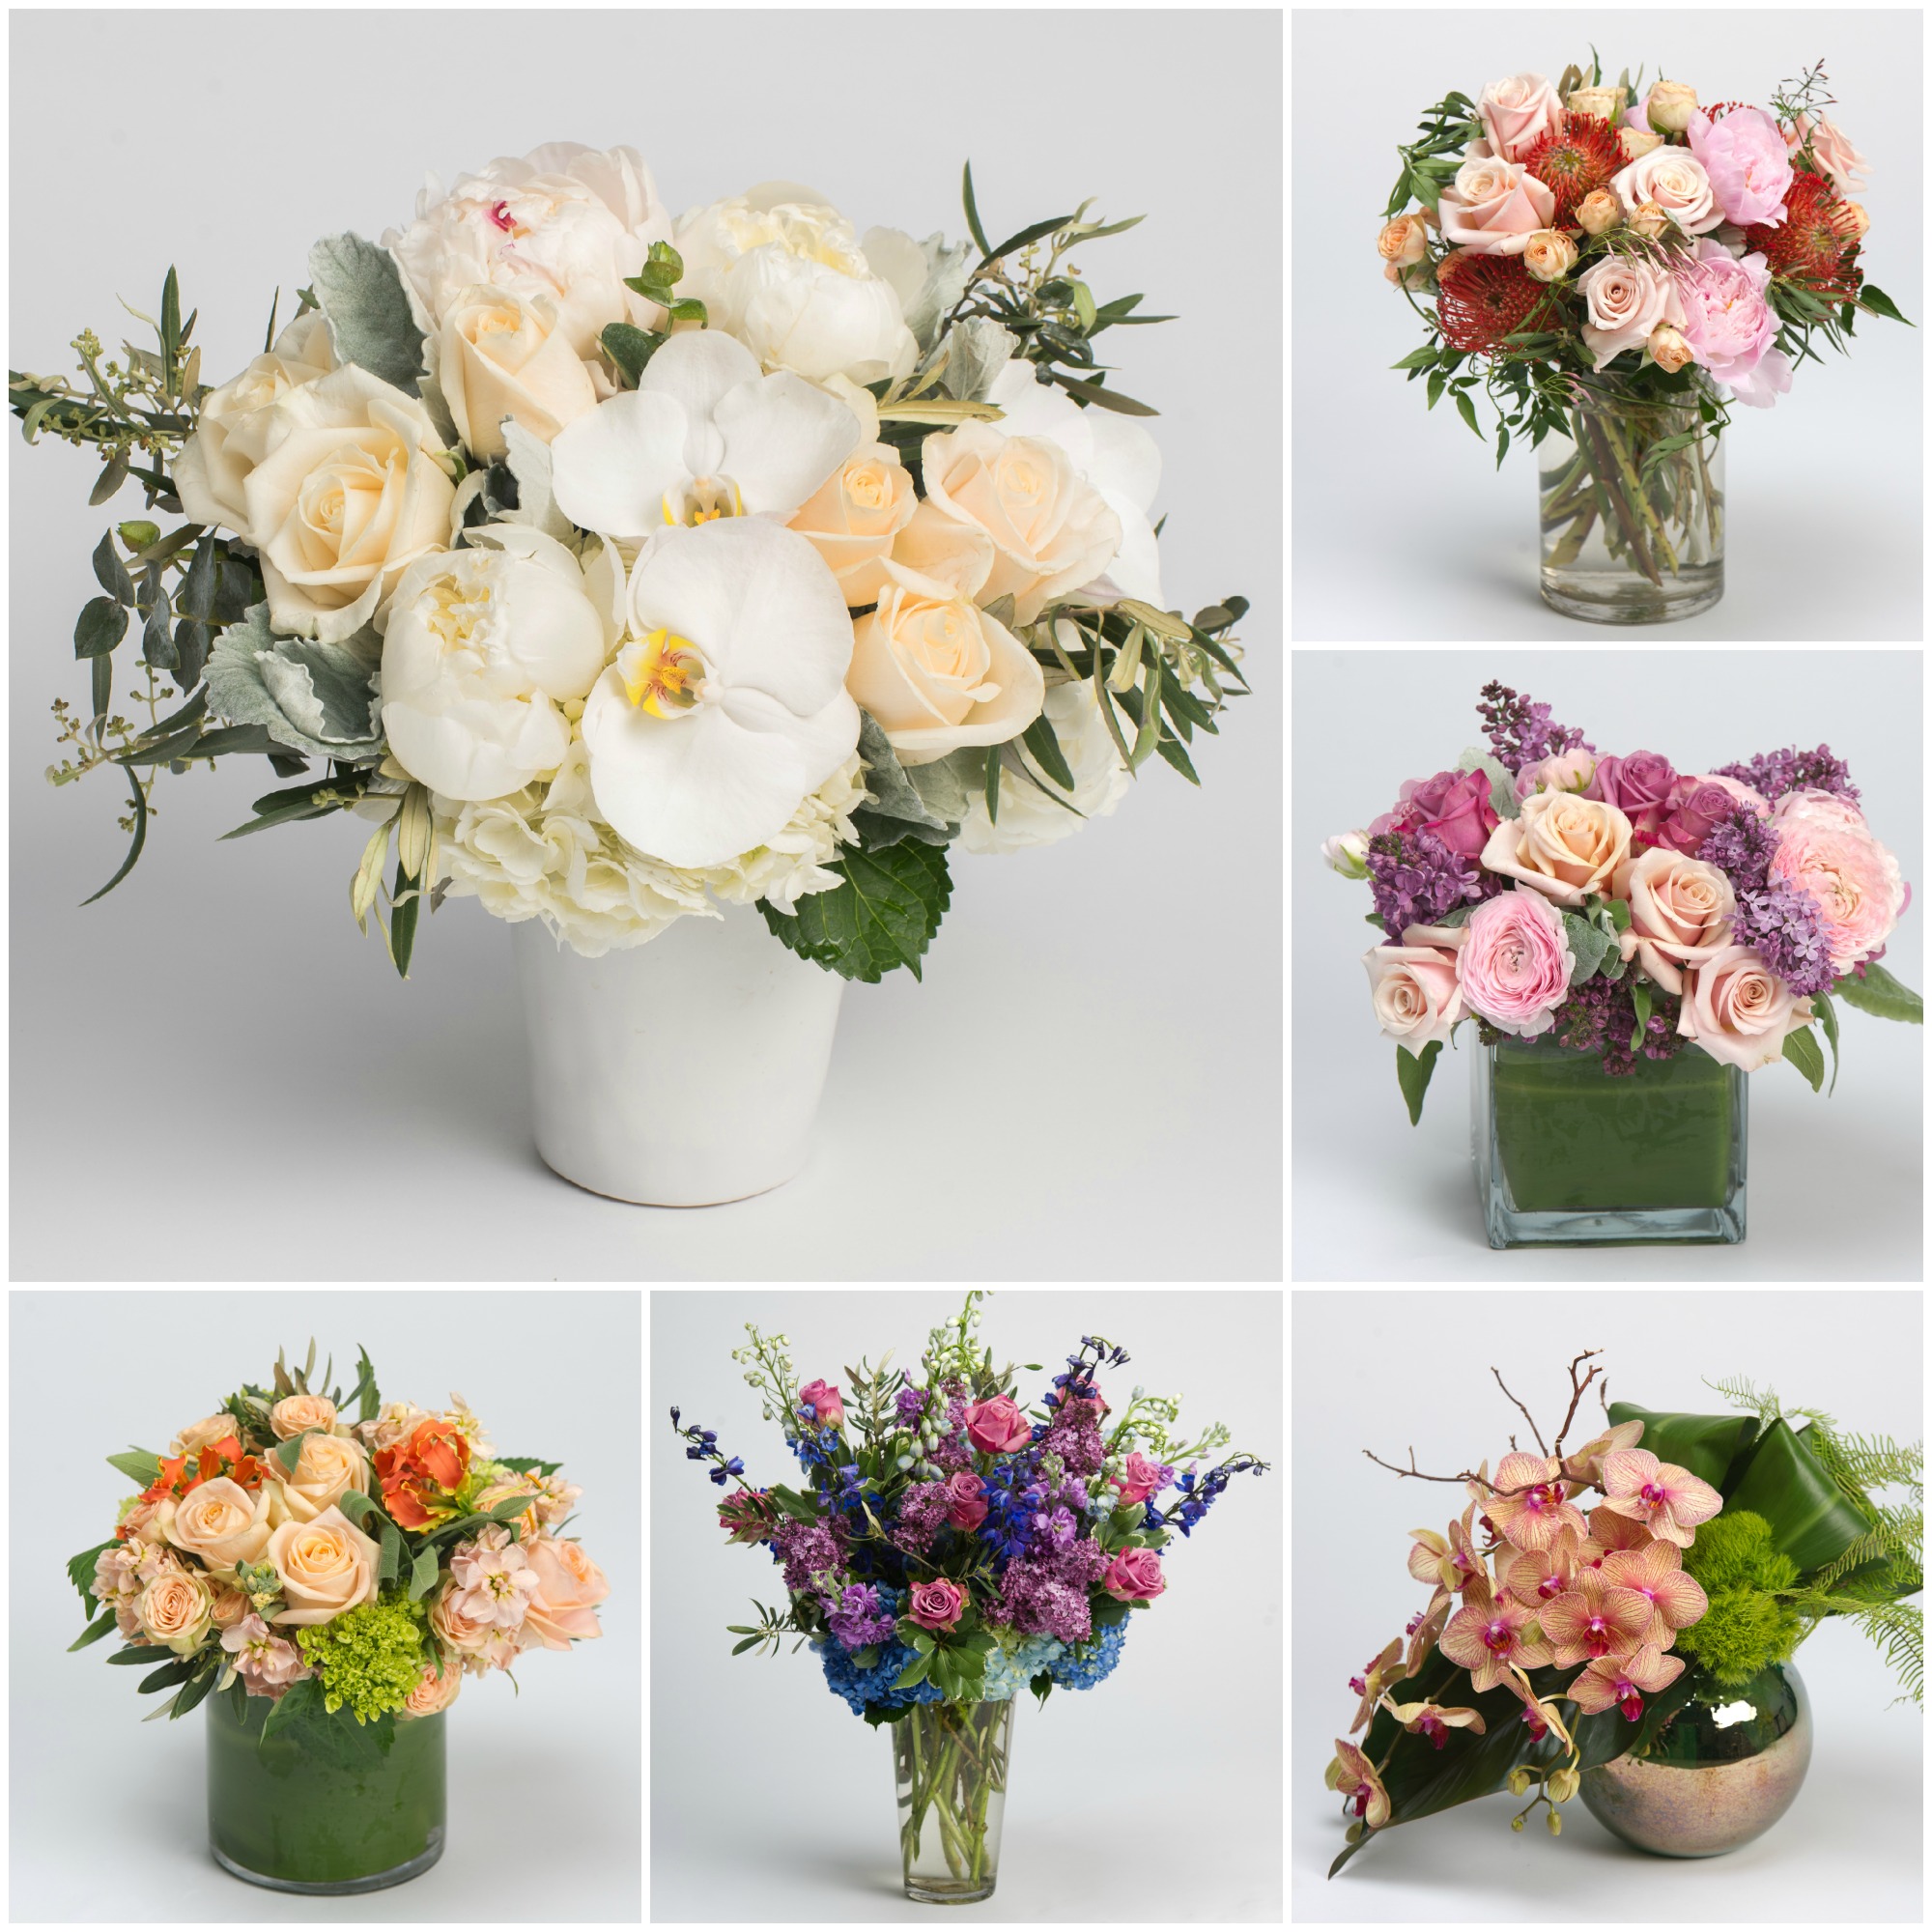 View our full selection of Mother's Day flower arrangements online at www.robertsonsflowers.com